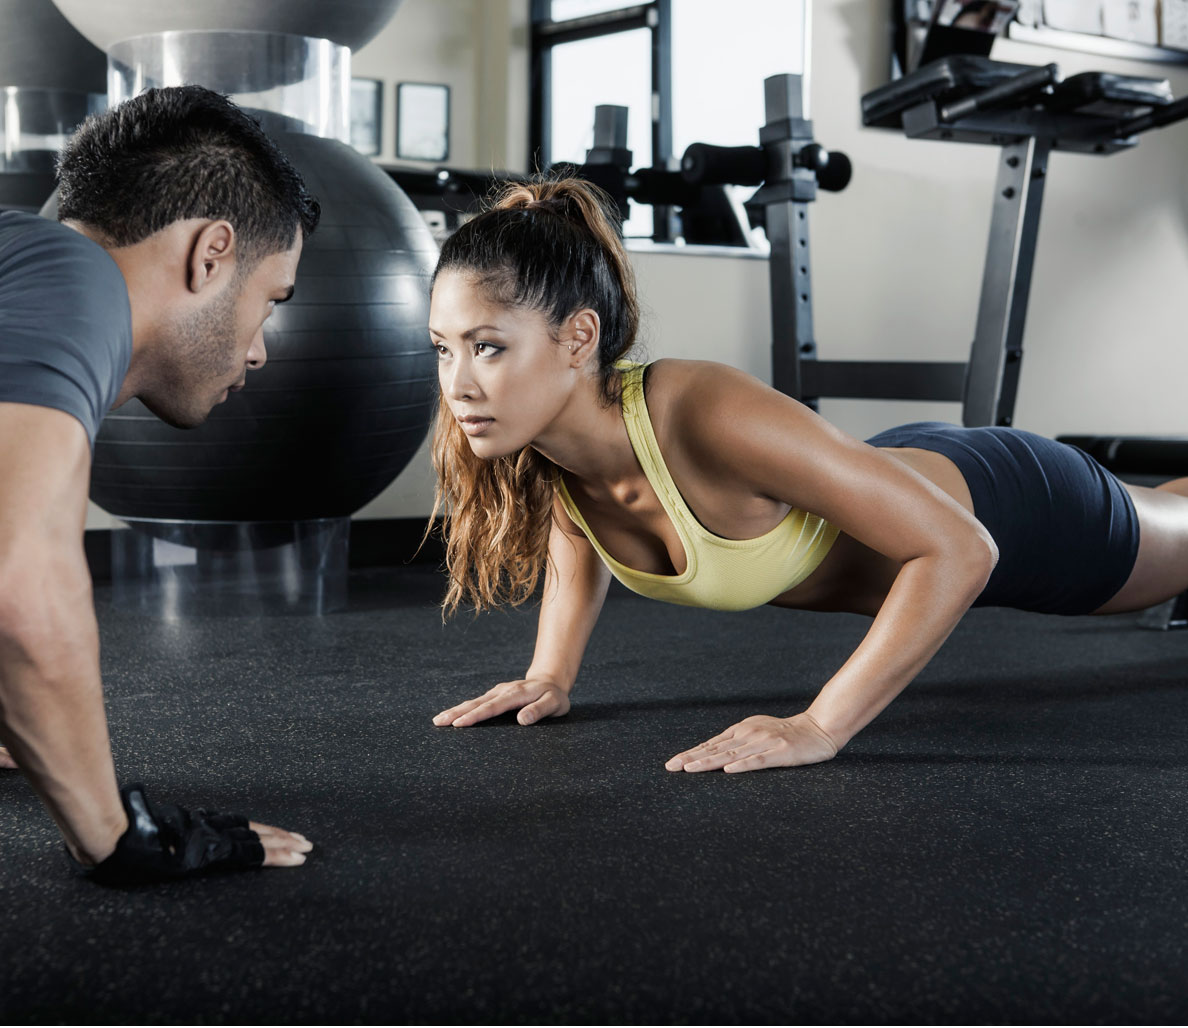 How to pick up women at the gym, according to women hq picture